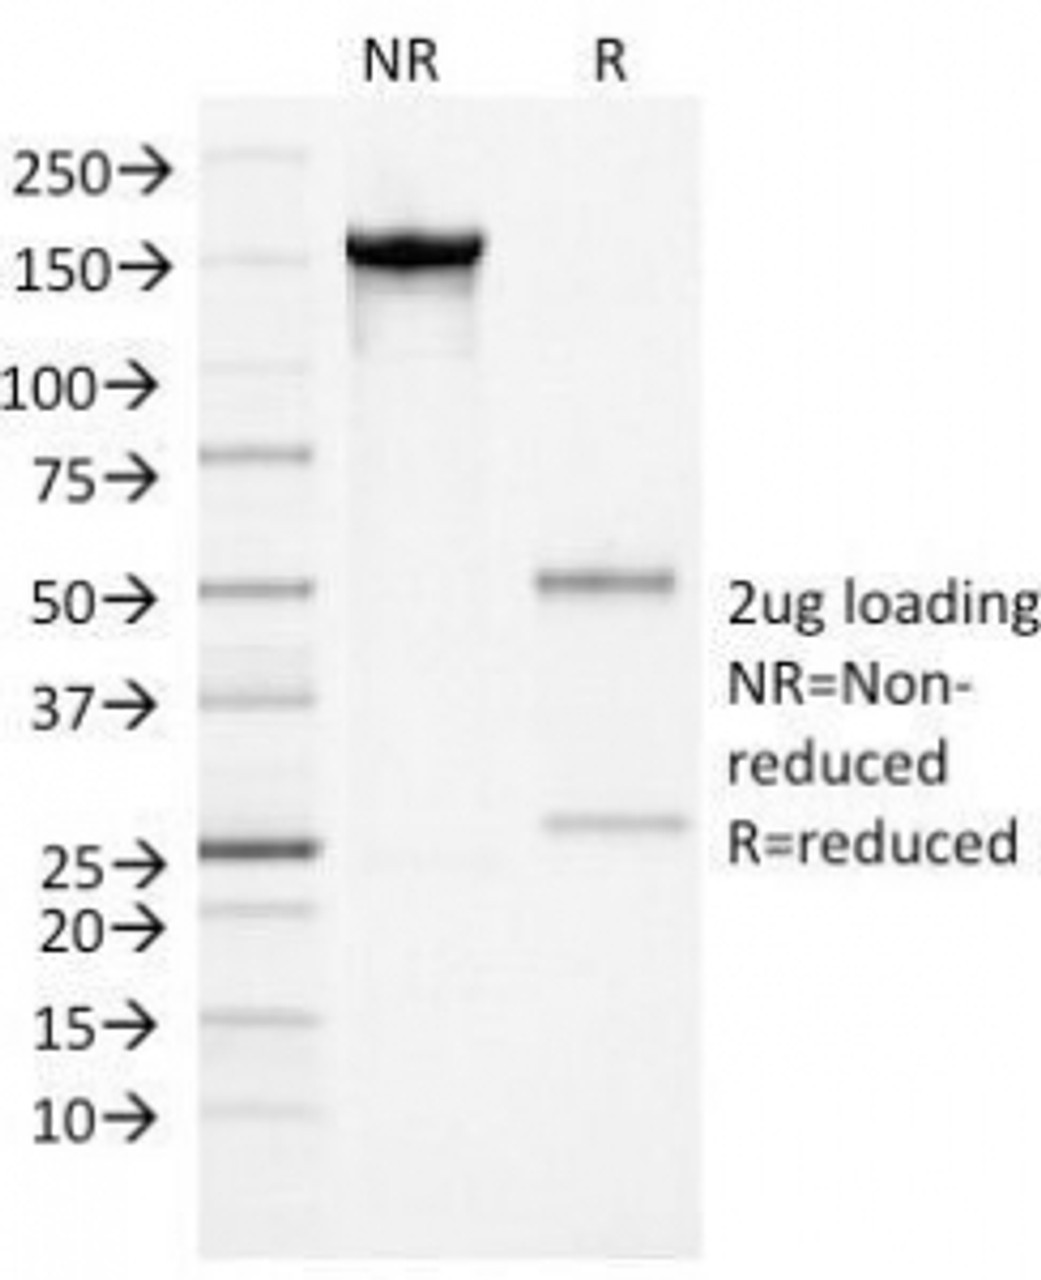 SDS-PAGE Analysis of Purified, BSA-Free Alpha-1-Antichymotrypsin Antibody (clone AACT/1452) . Confirmation of Integrity and Purity of the Antibody.